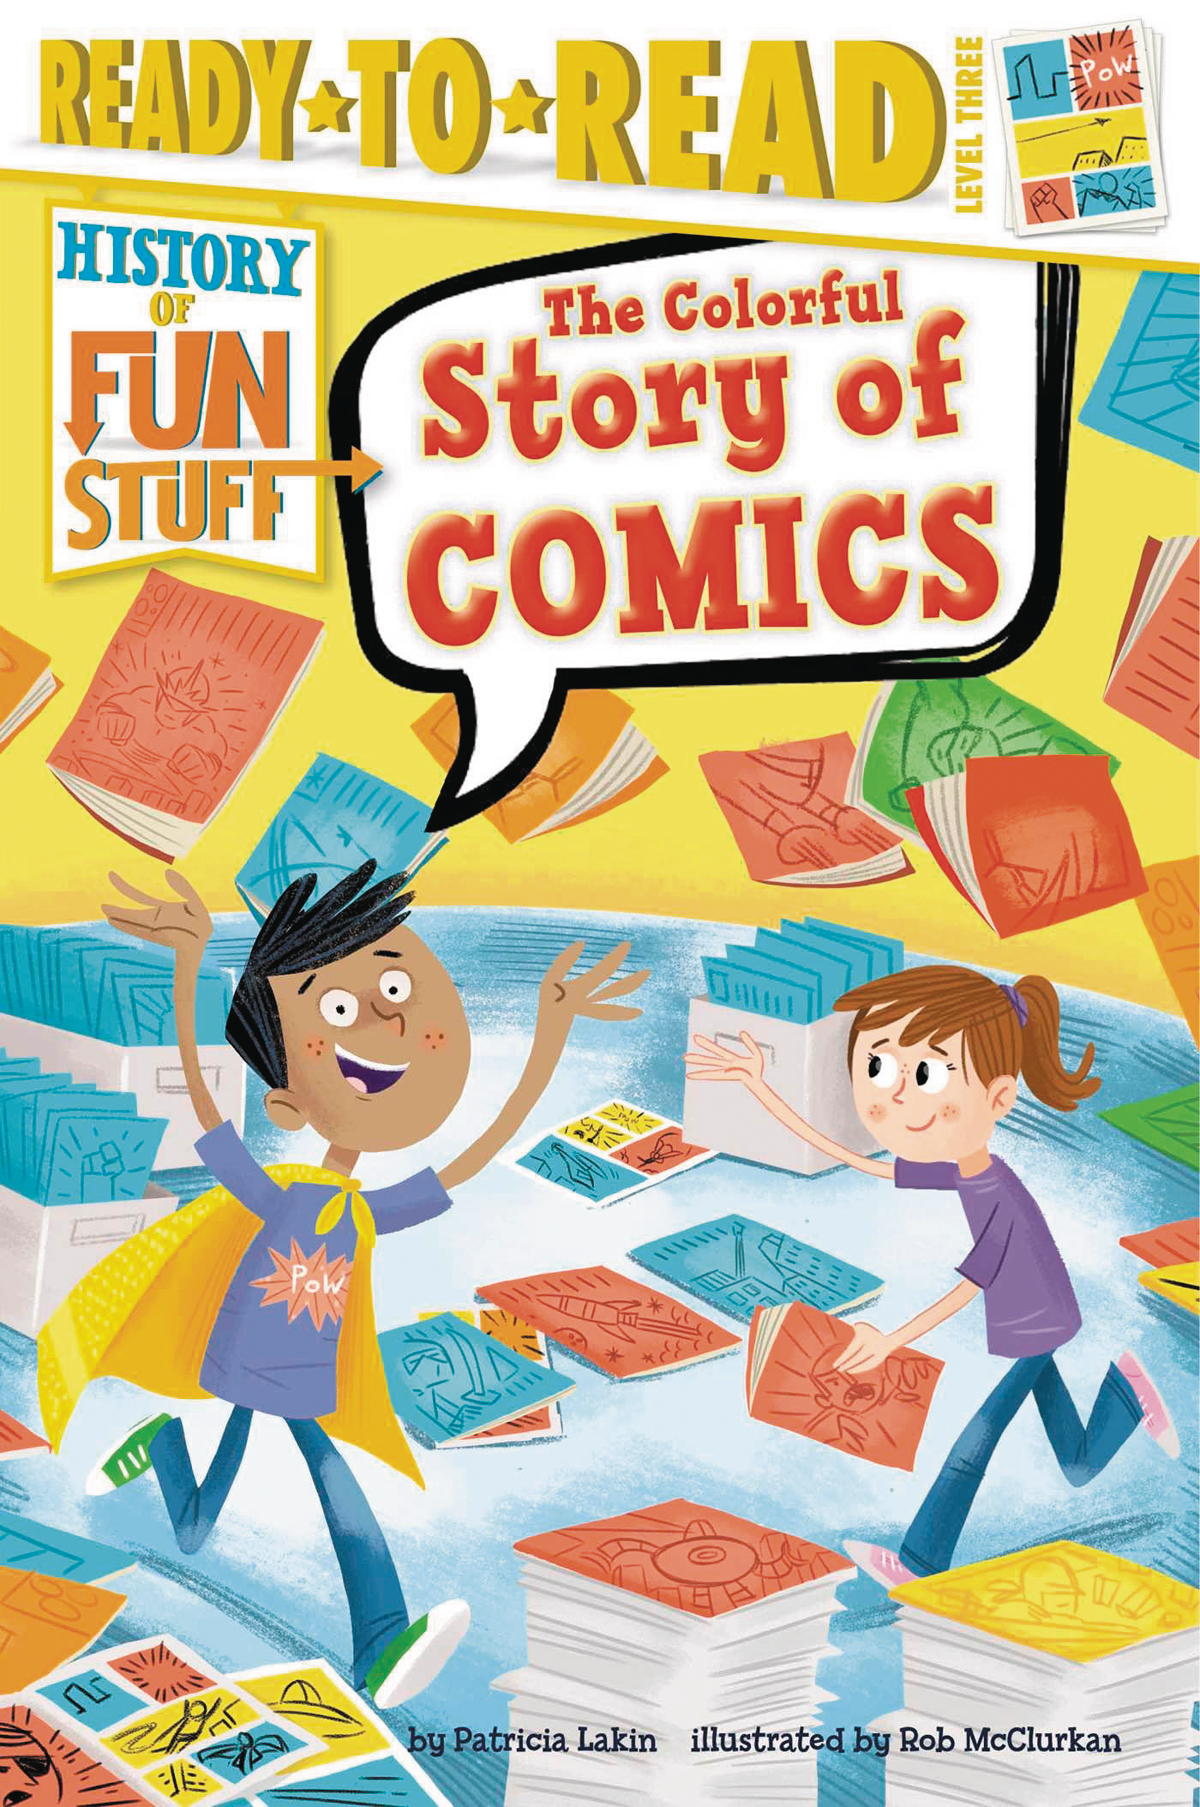 Stuff to the stories игра. Story fun. Read stories. Fanstuff. Colours story